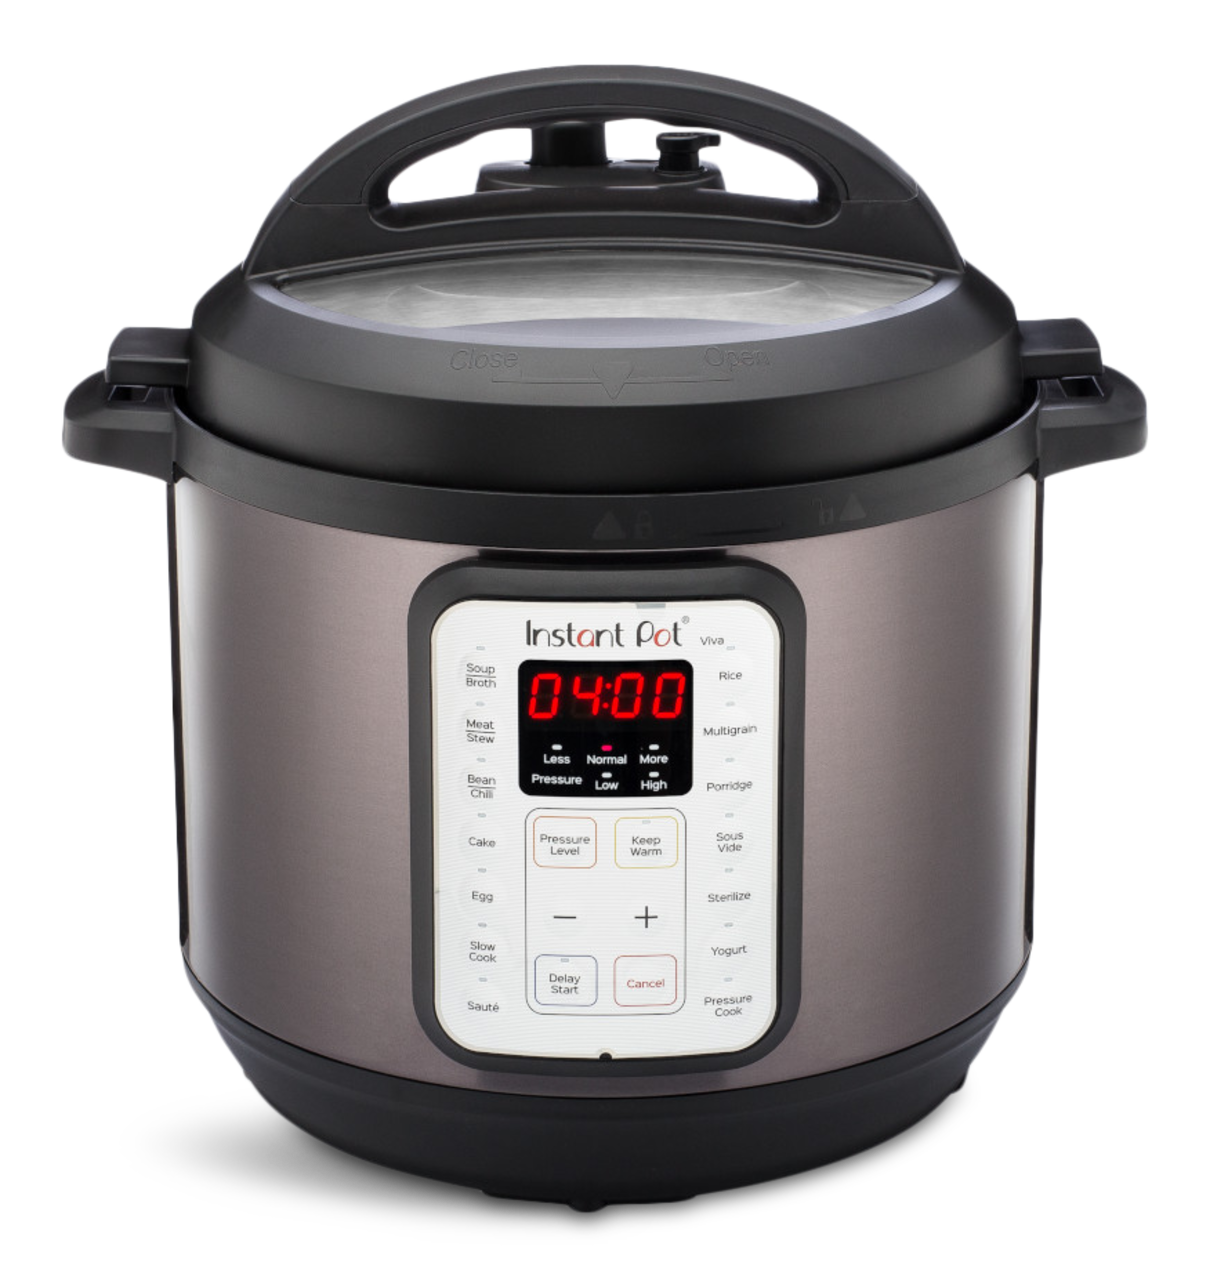 https://media-www.canadiantire.ca/product/living/kitchen/kitchen-appliances/0430765/instant-pot-viva-8-black-5b417a23-9273-4423-a4a4-b4fde6226b19.png?imdensity=1&imwidth=640&impolicy=mZoom